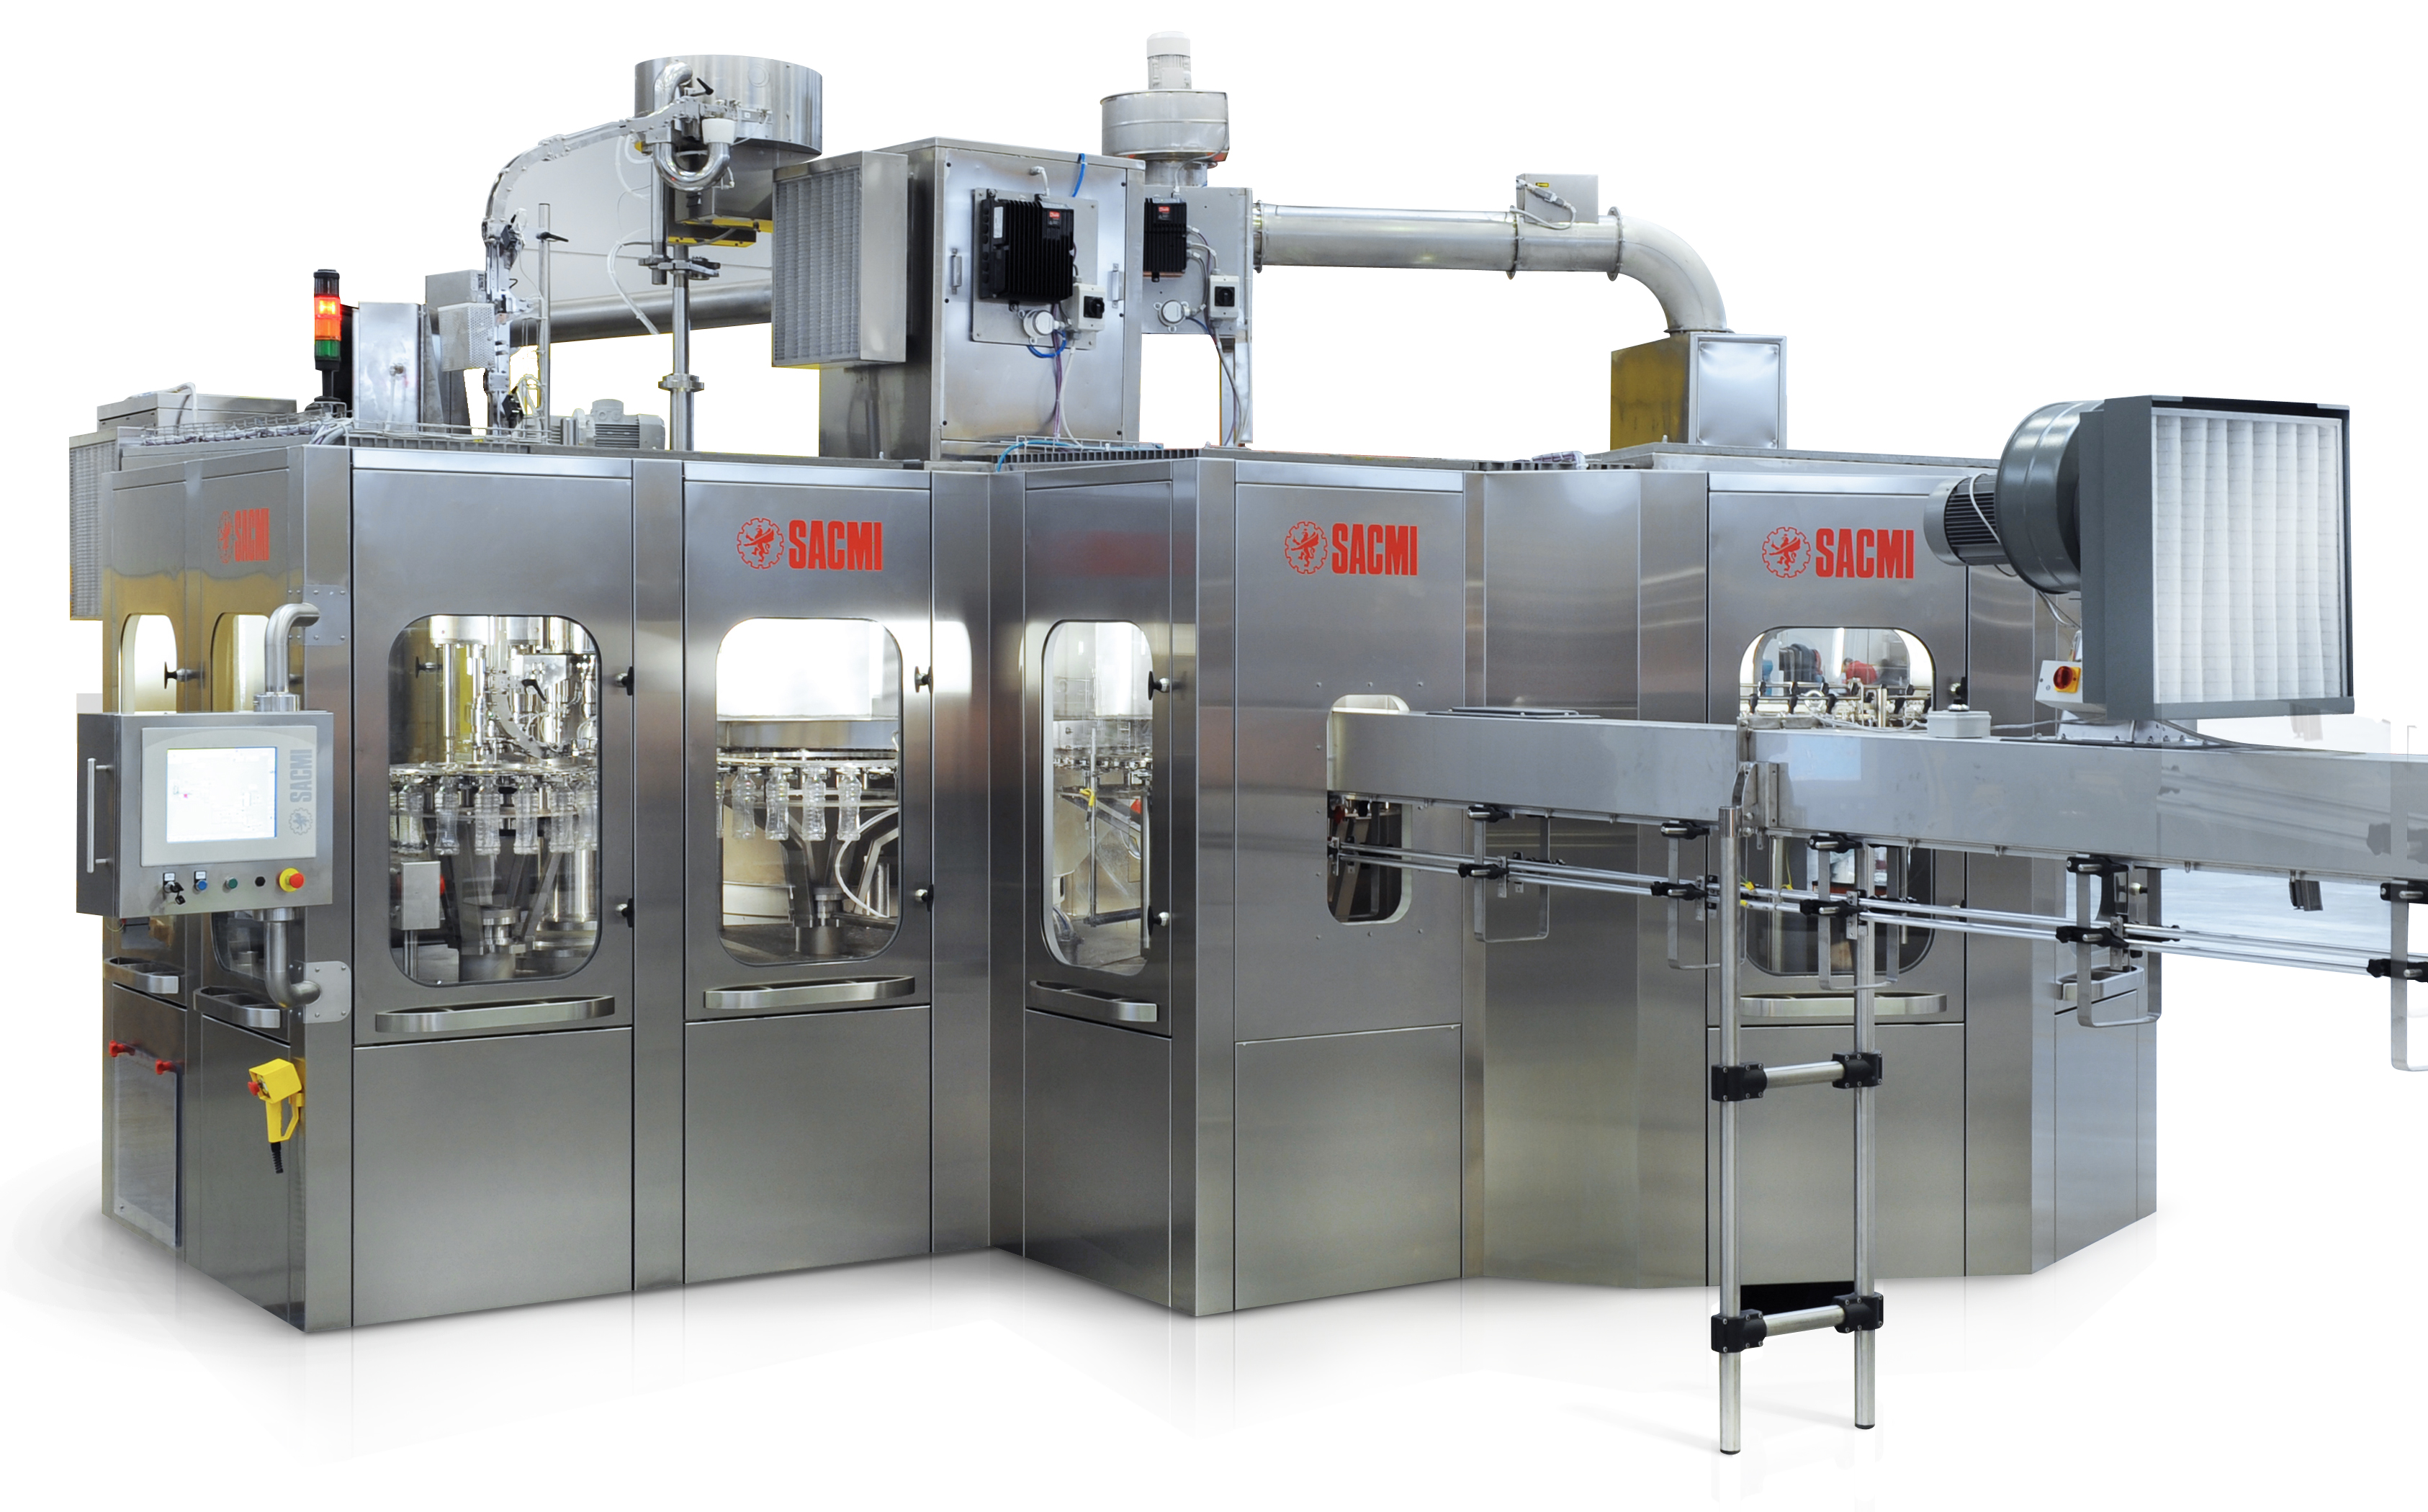 Systems for the production of customised packaging for beverage.SACMI